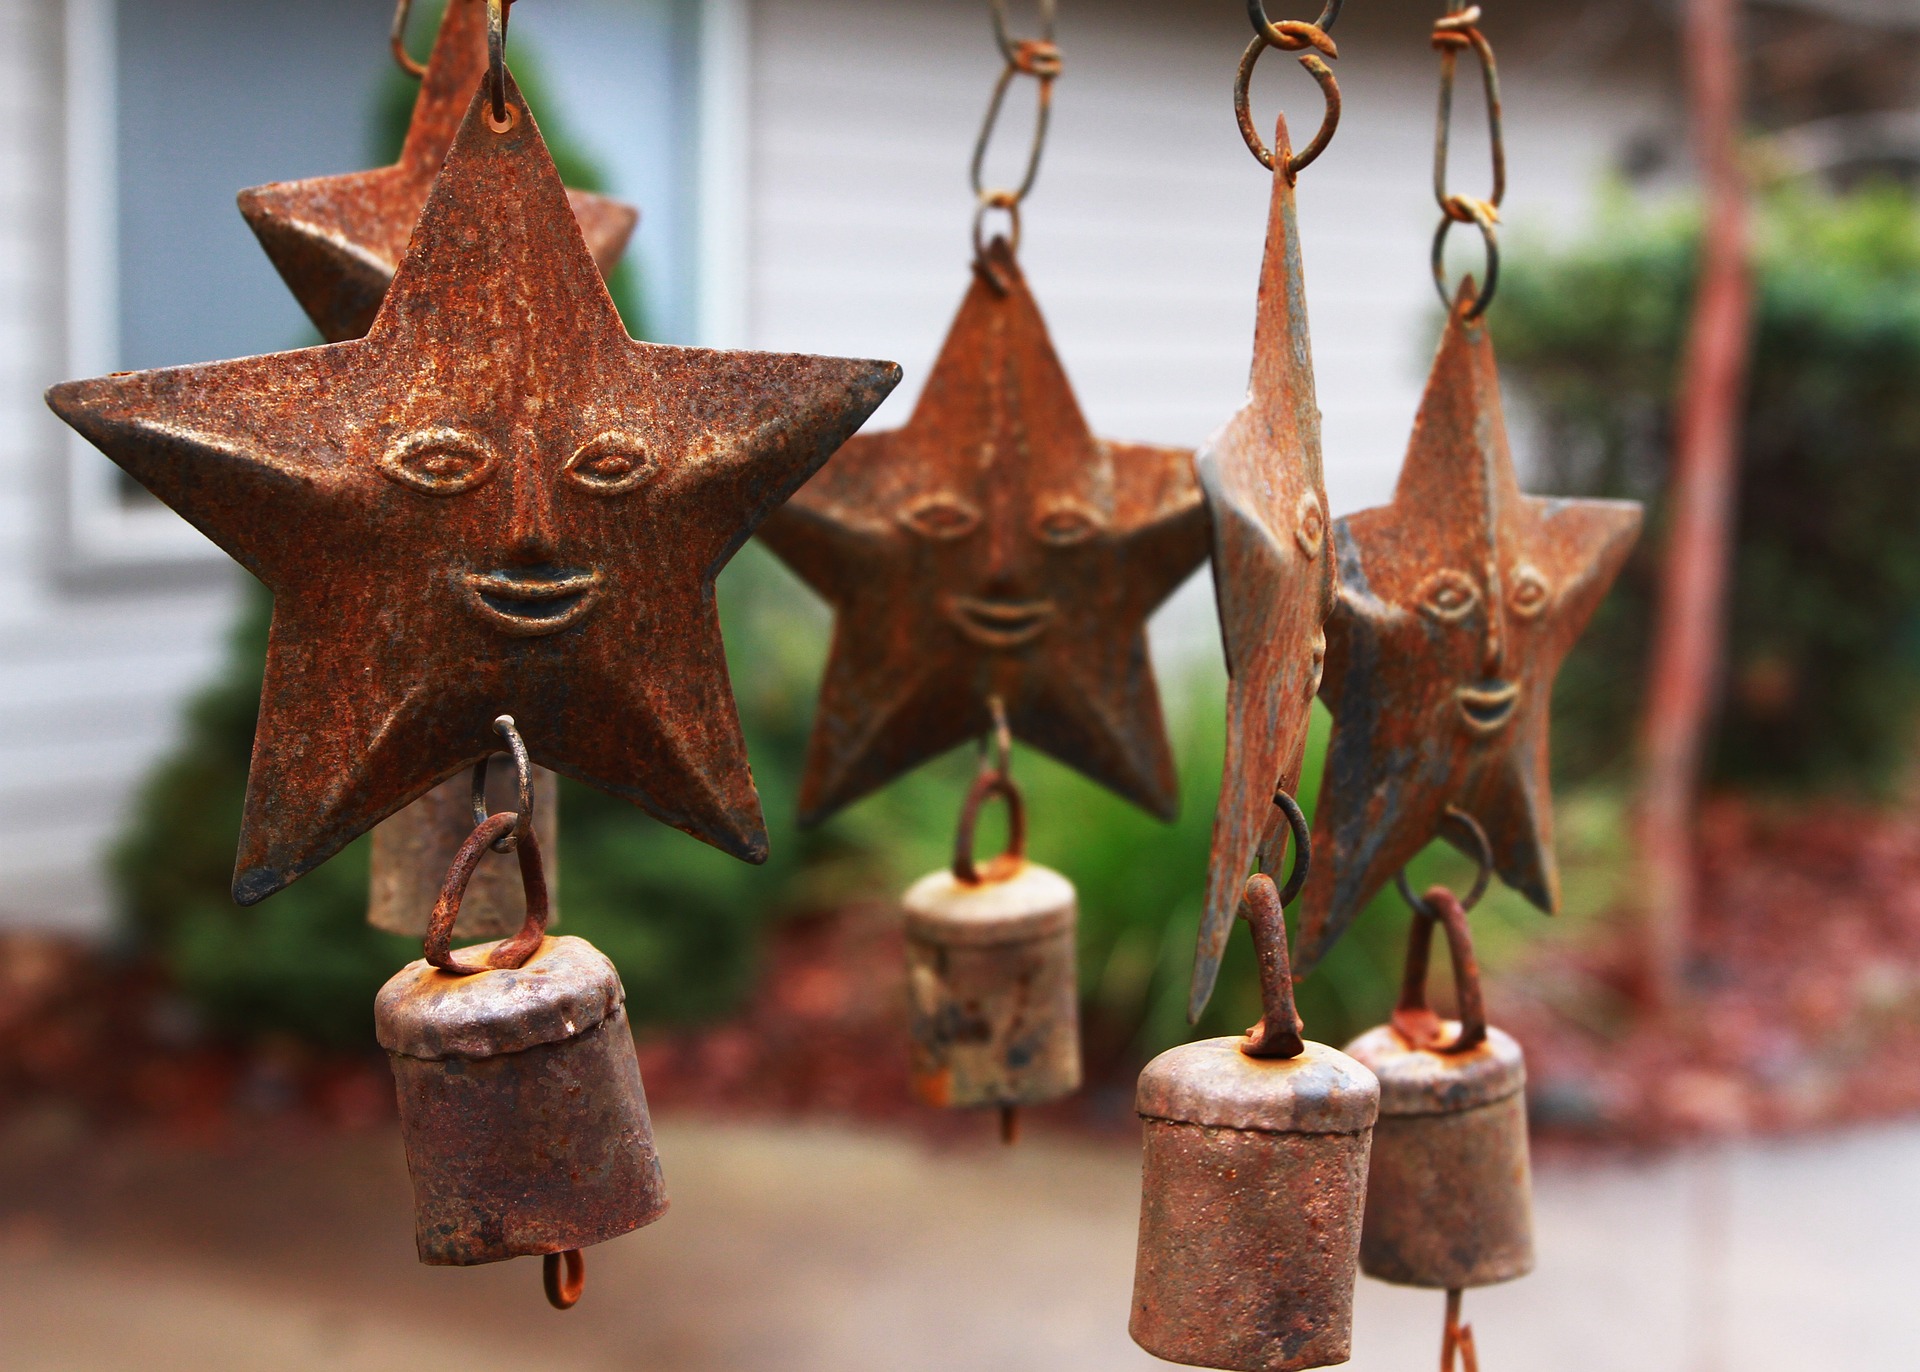 TIPS AND TRICKS YOU COULD USE TO GET RID OF NEGATIVE ENERGY AT HOME Wind-chimes-1147912_1920